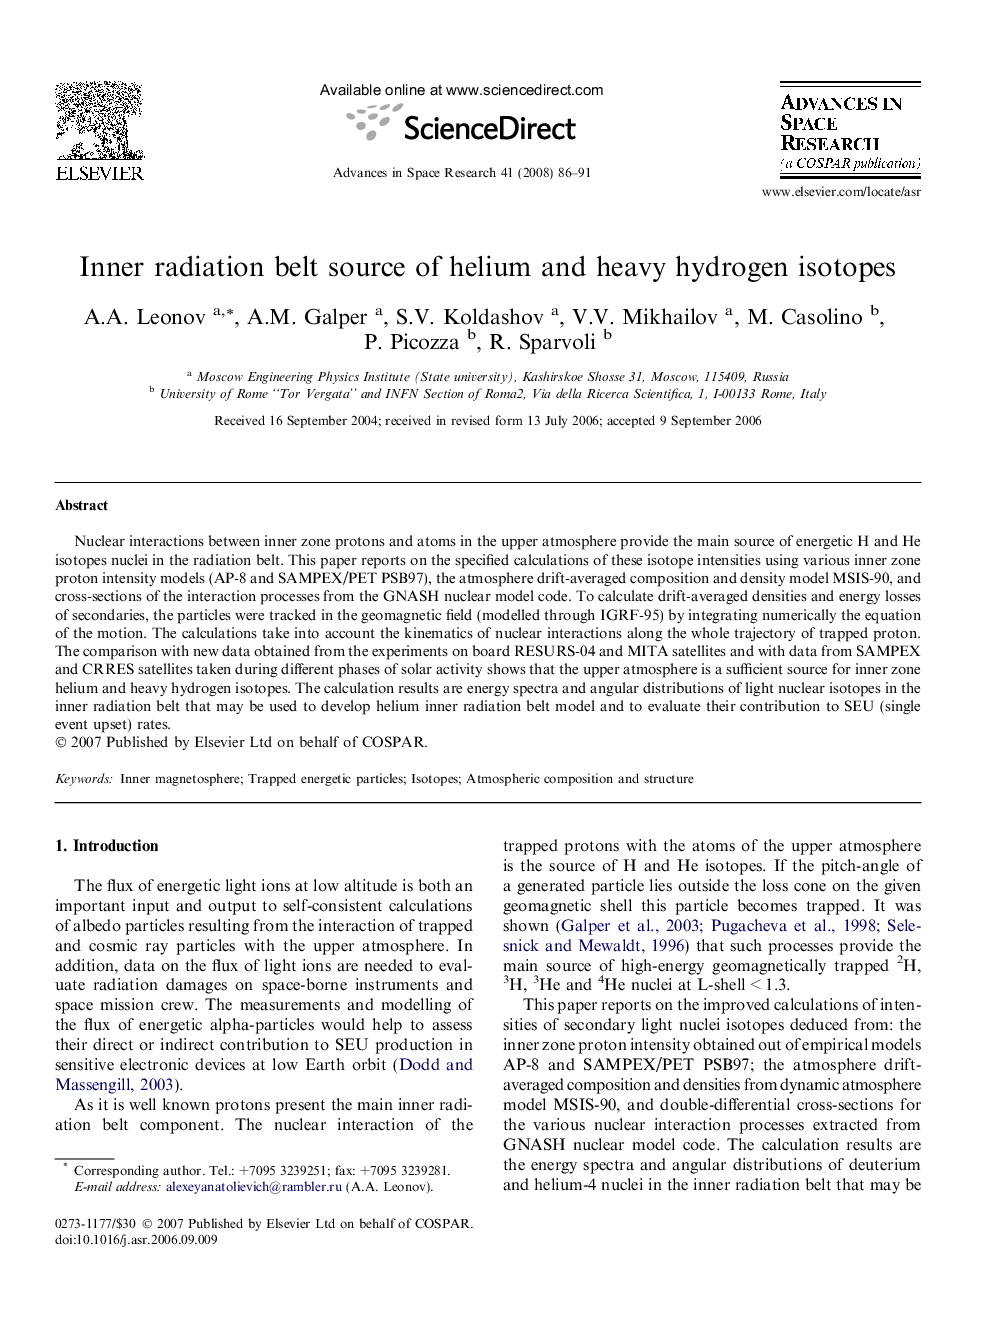 Inner radiation belt source of helium and heavy hydrogen isotopes